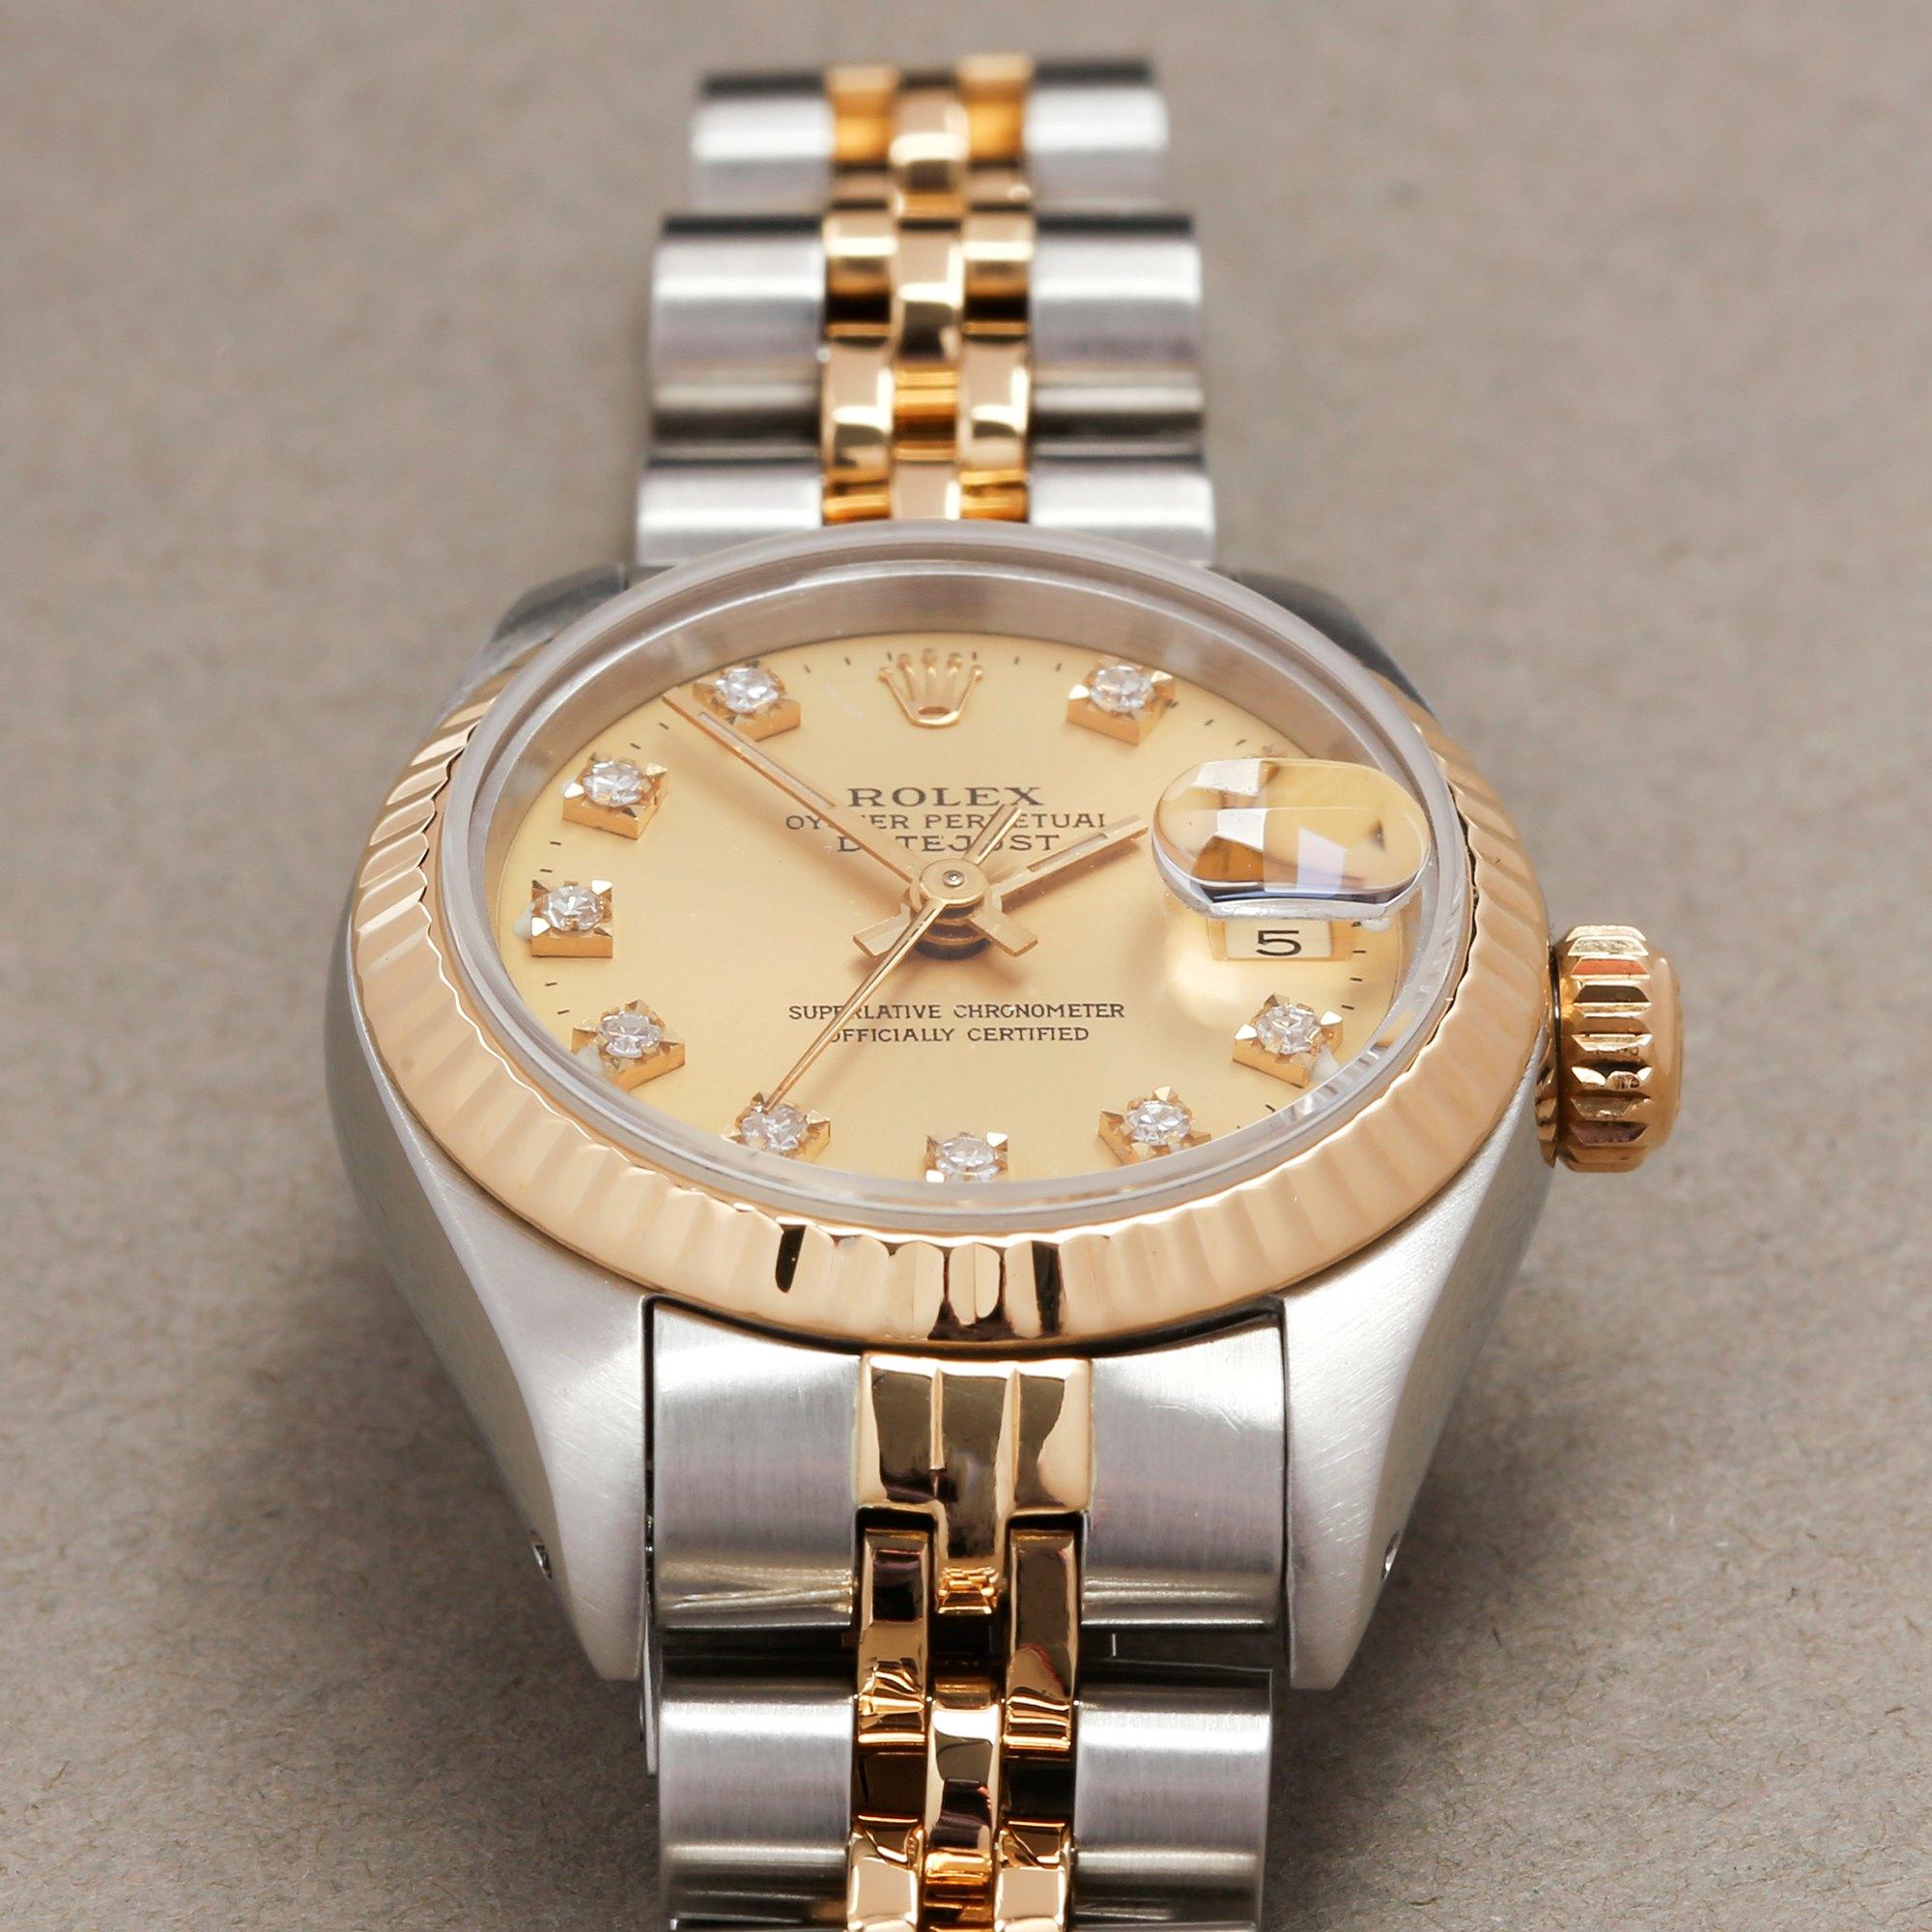 Rolex Datejust 26 69173 Ladies Stainless Steel and Yellow Gold Watch 2